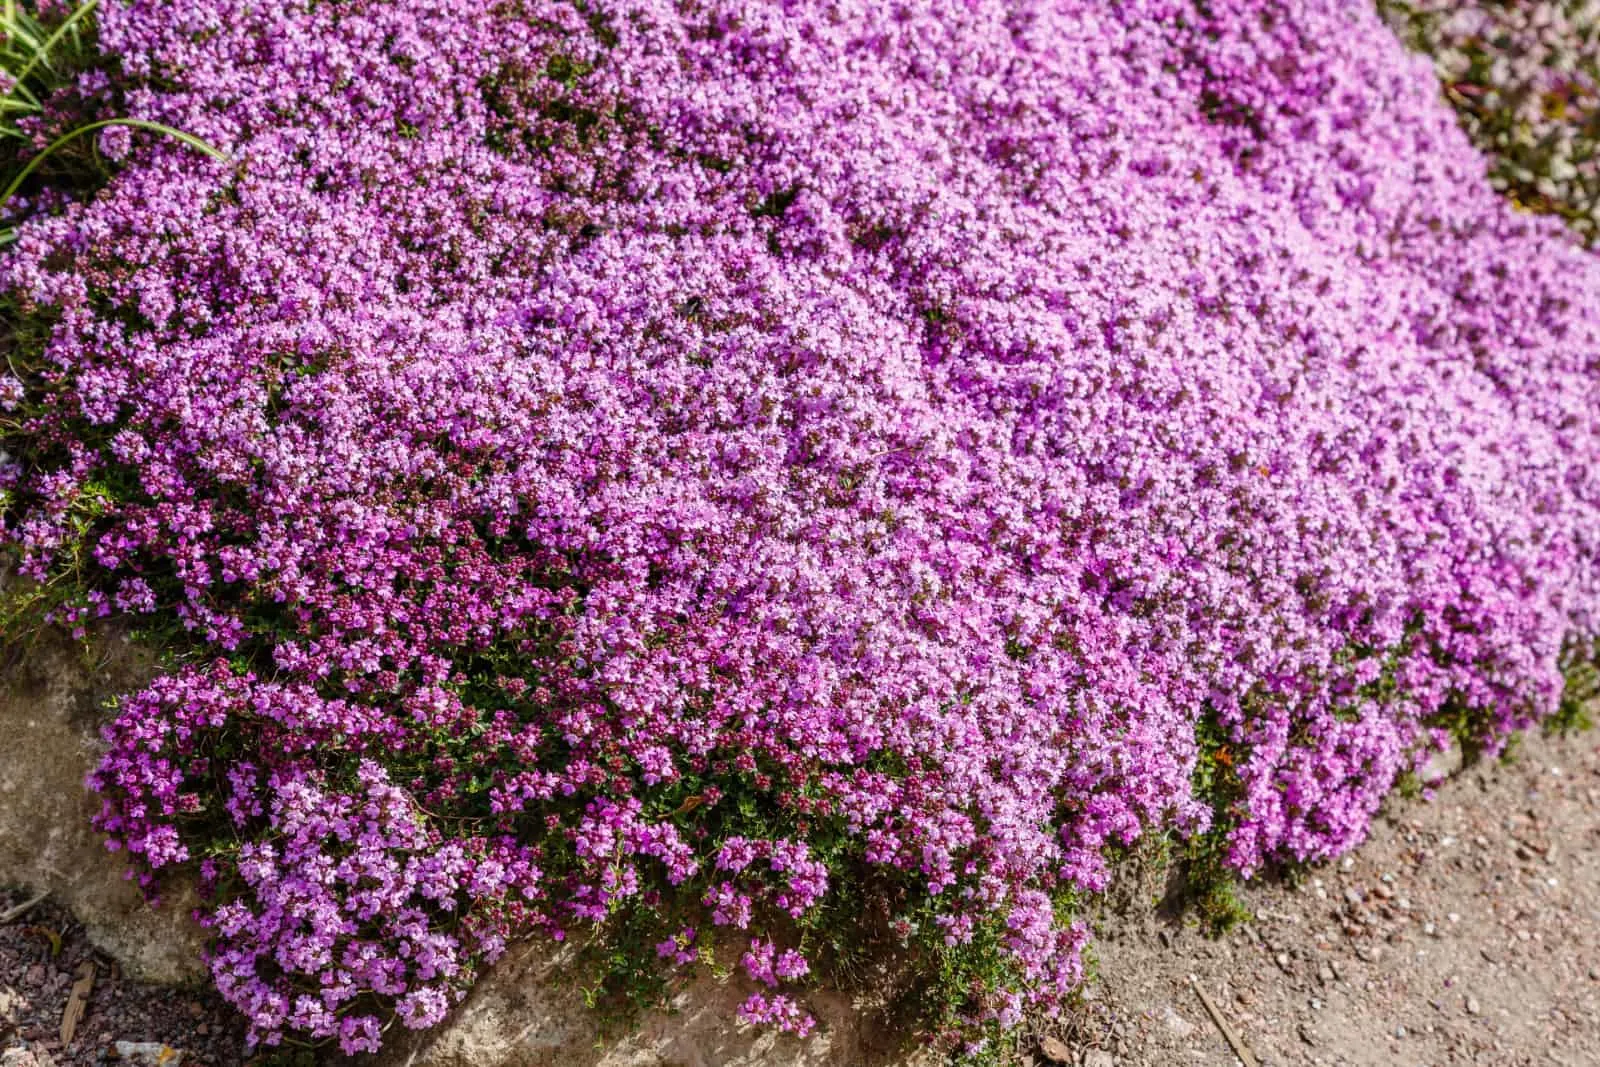 Creeping thyme (thymus serpyllum) is a beautiful perennial plant for the rock garden.